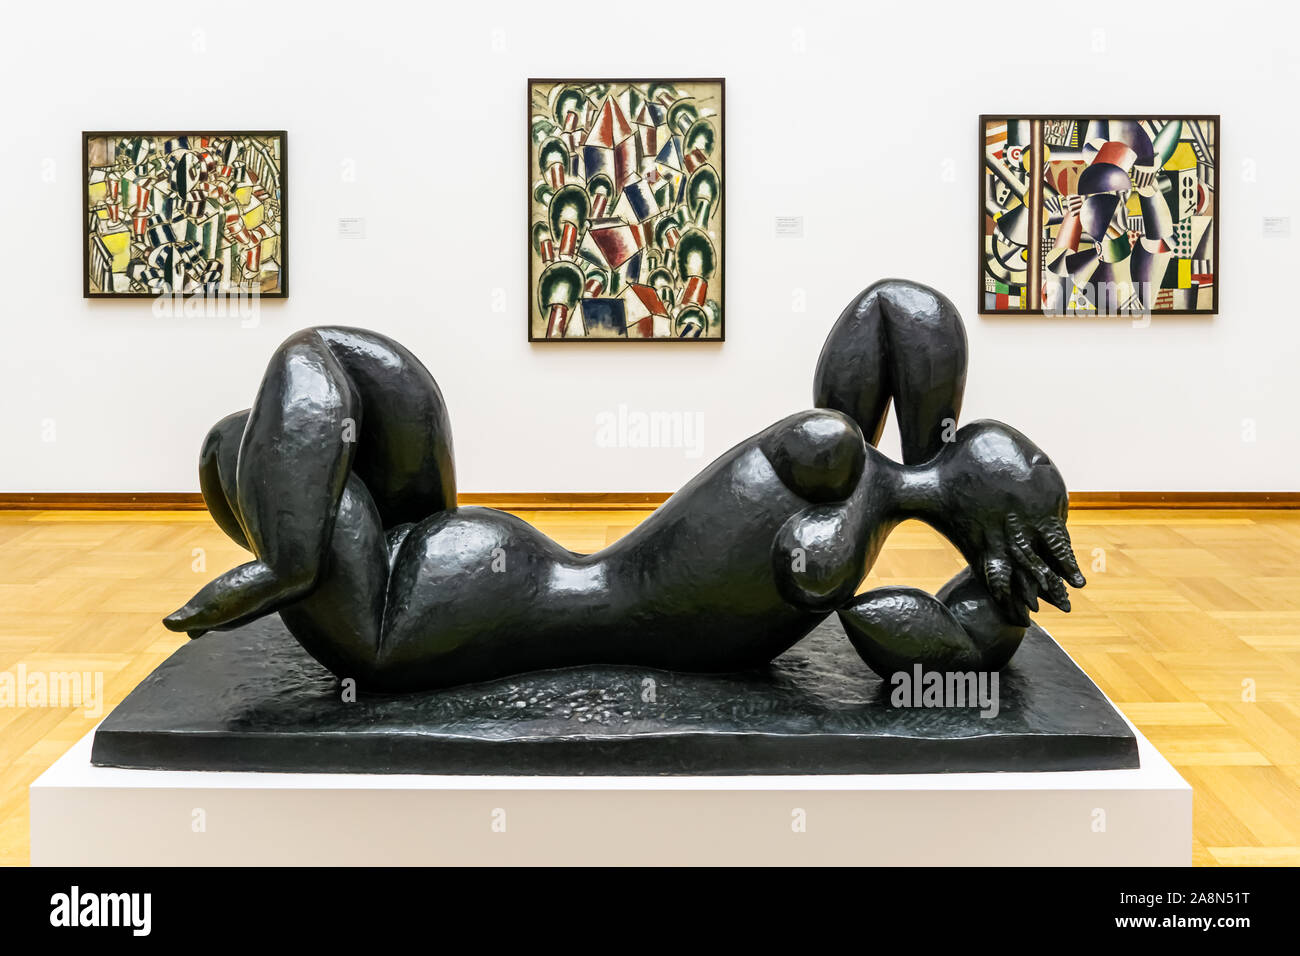 Henri Laurens The Fall sculpture and Fernand Leger paintaings in the background at Basel Art Museum, Switzeland. Stock Photo